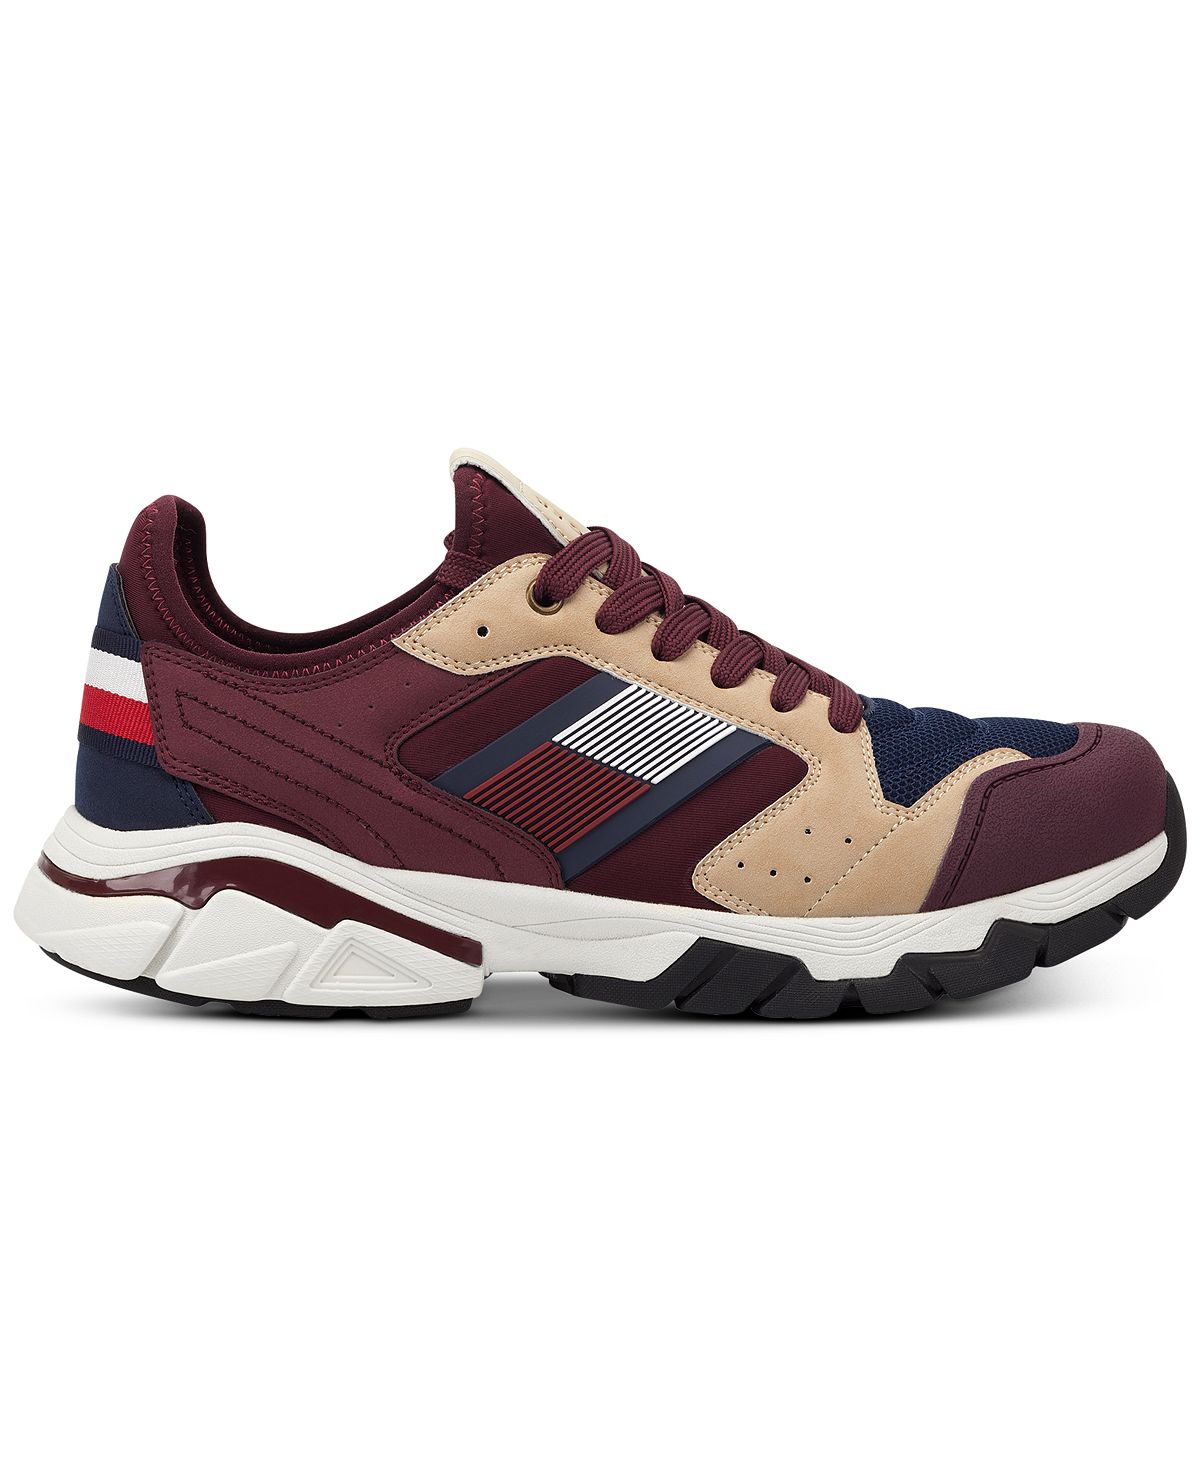 Tommy Hilfiger Torque Sneakers Red